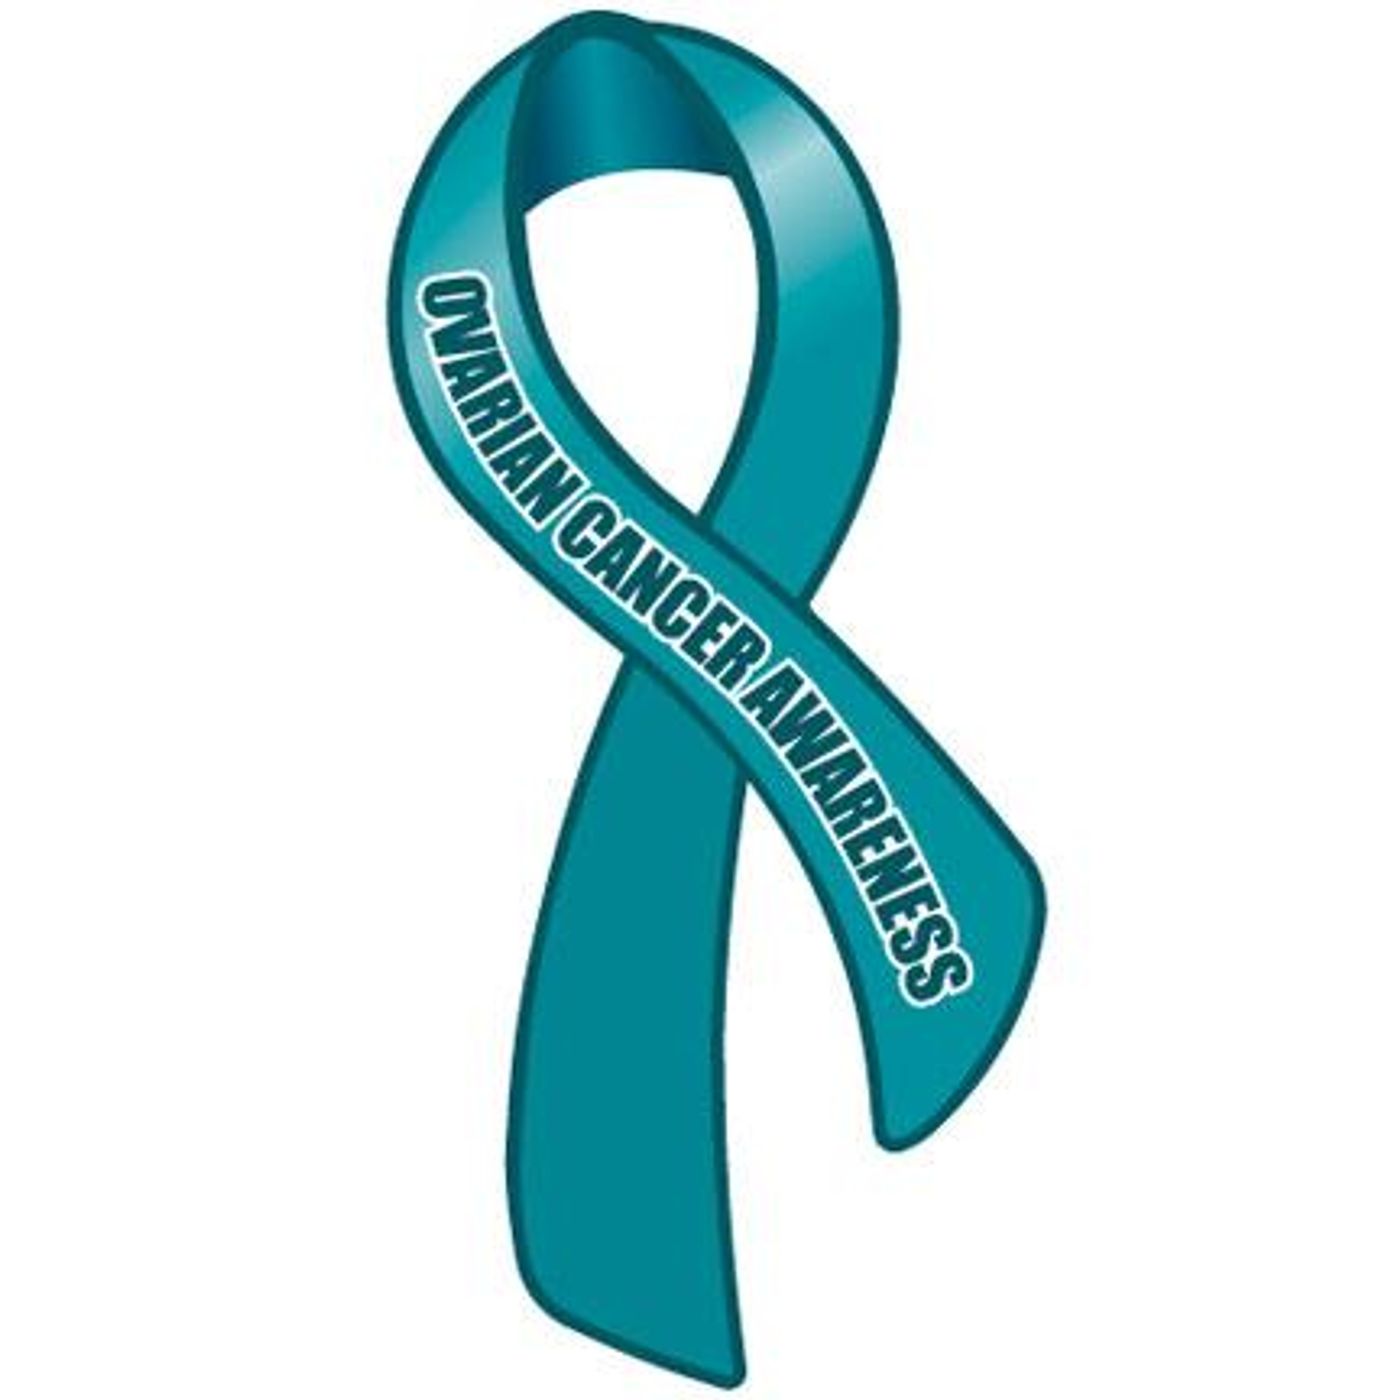 Ovarian cancer is the 5th leading cause of cancer death among women.